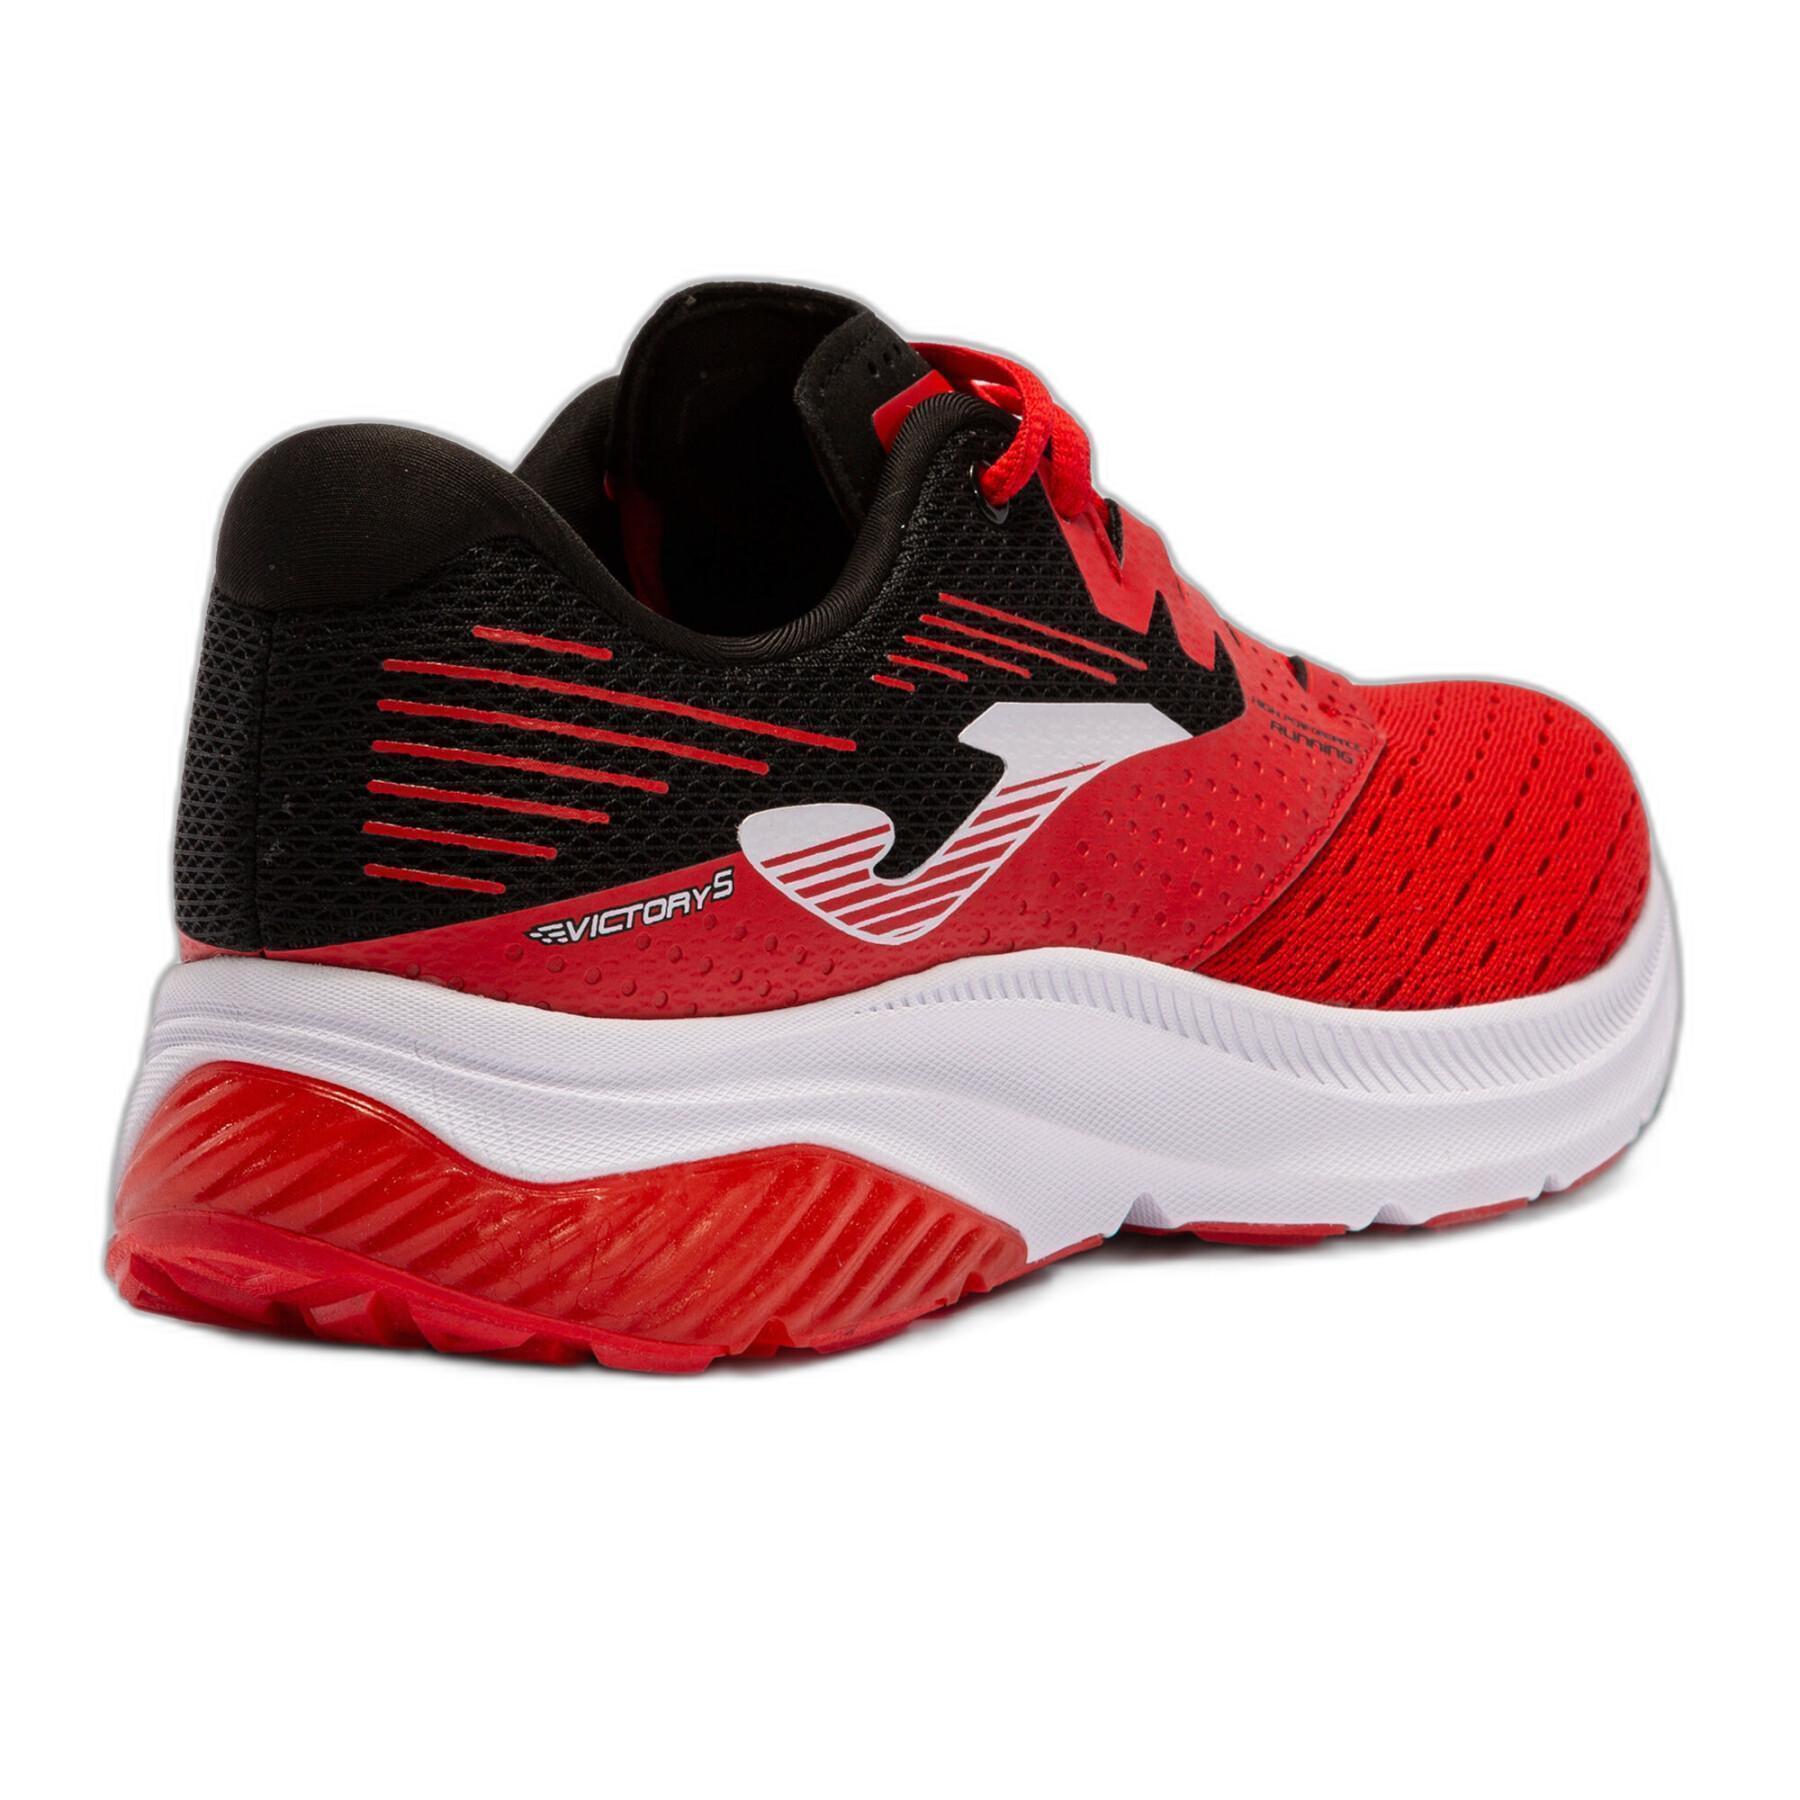 Chaussures de running Joma R.Victory